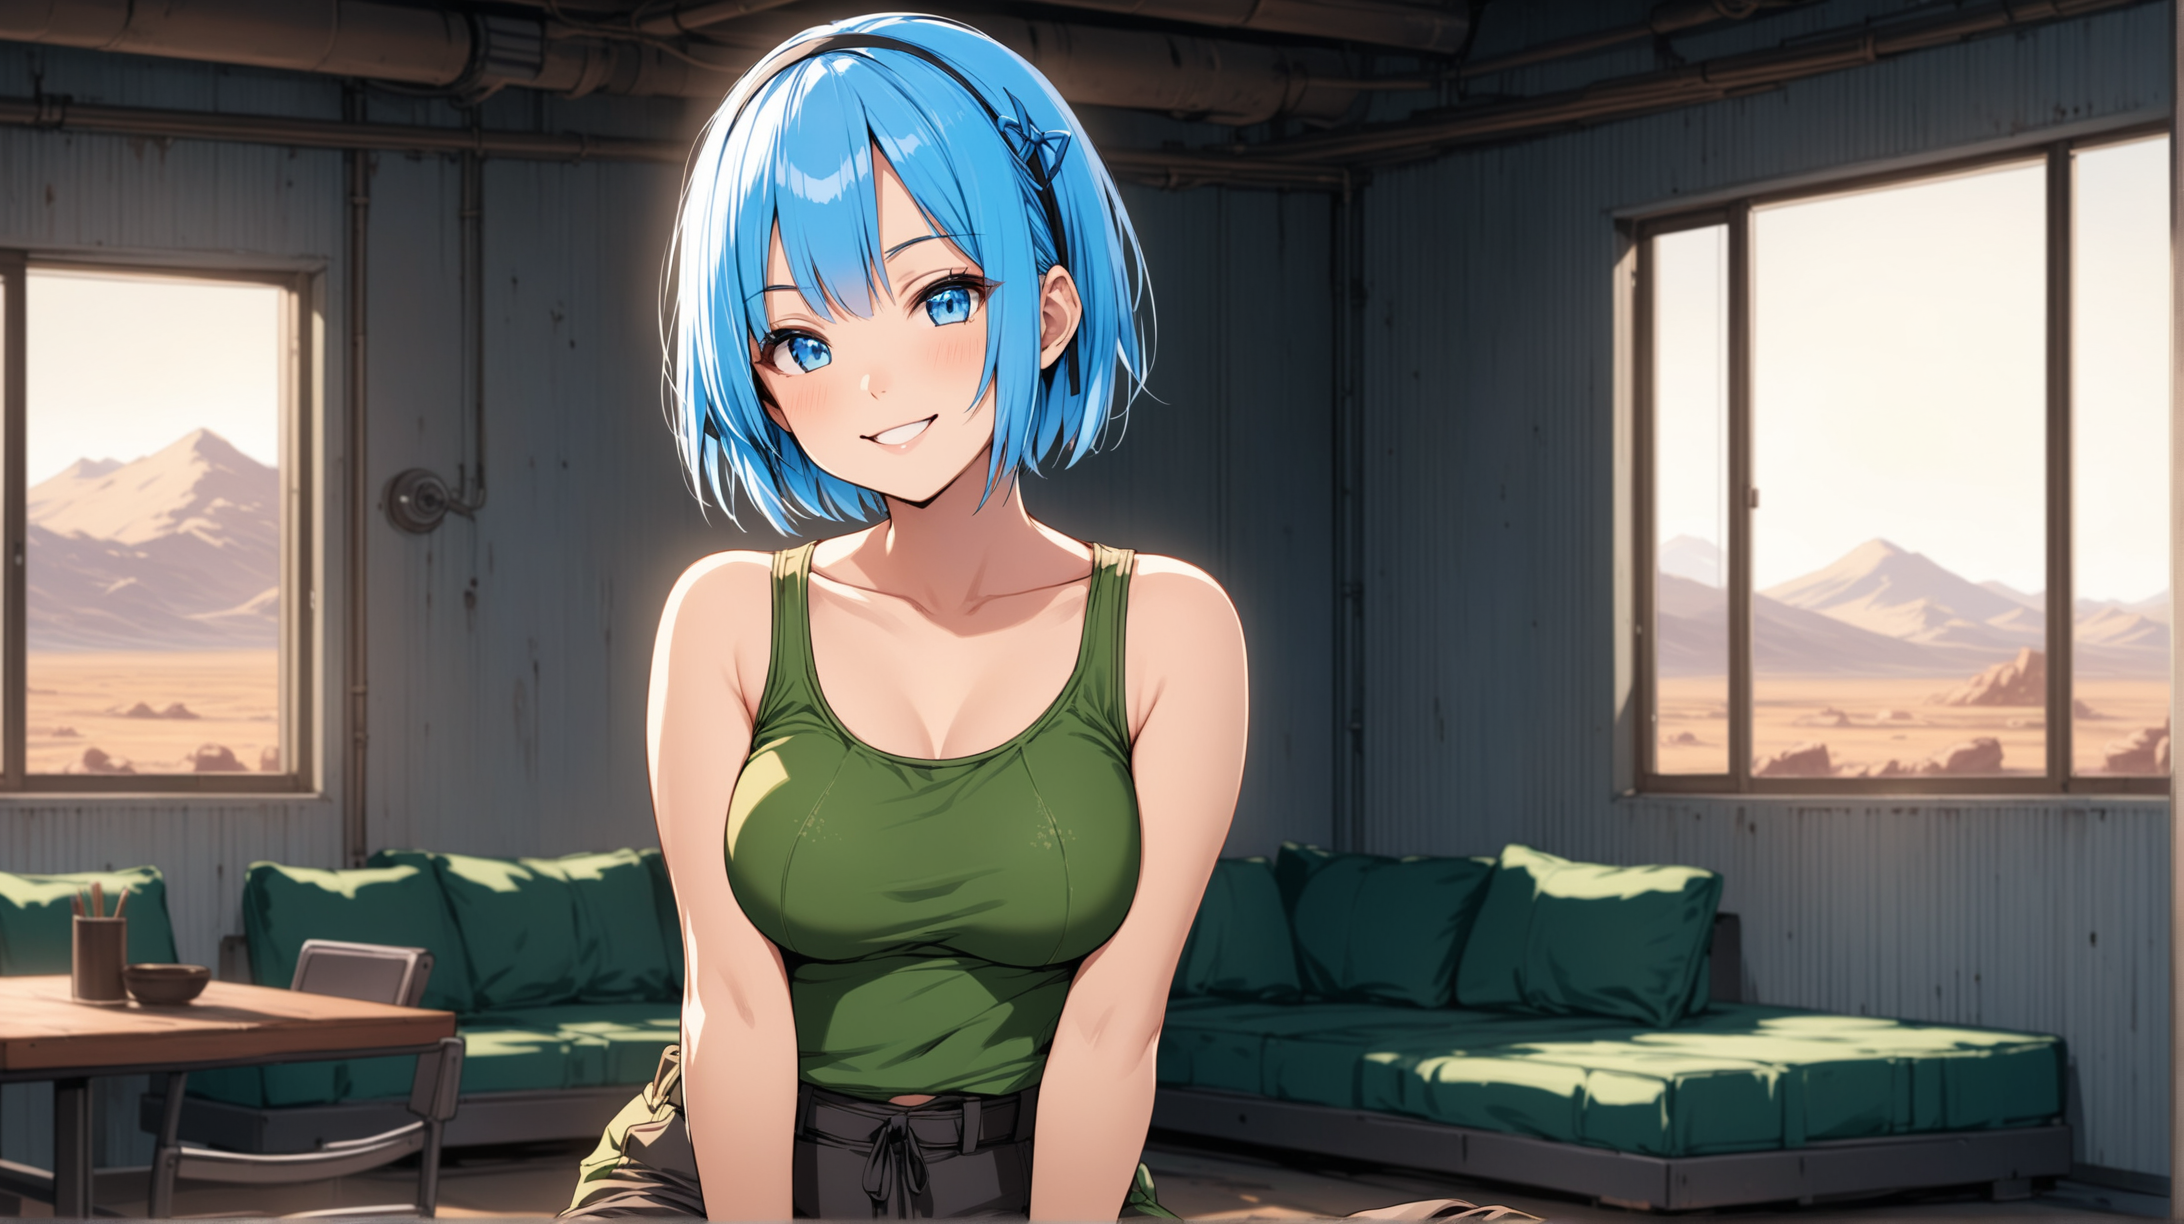 Relaxed Rem Character Art in FalloutInspired Attire